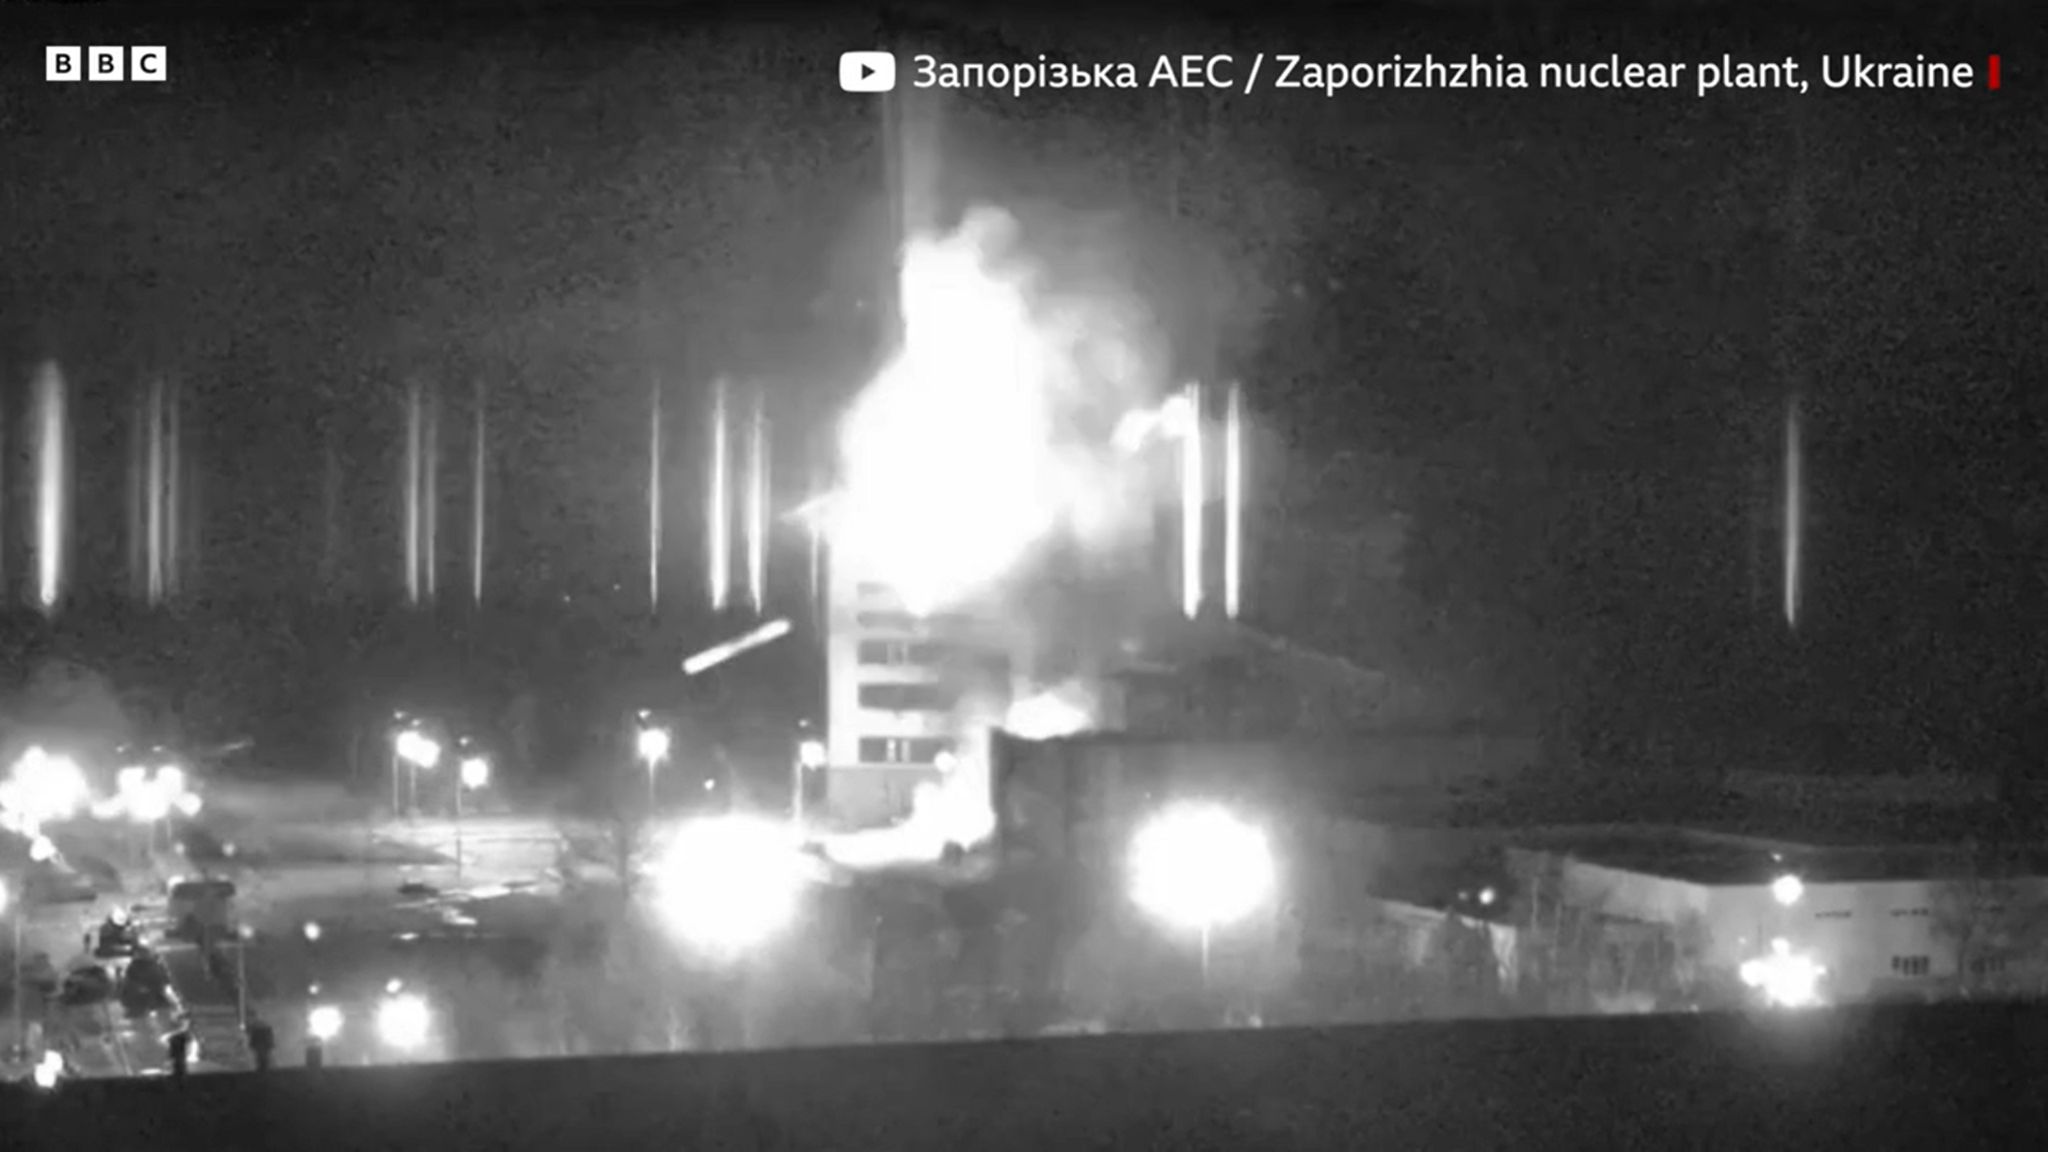 Zaporizhzhia nuclear power plant was hit by repeated shelling in the early hours of Friday